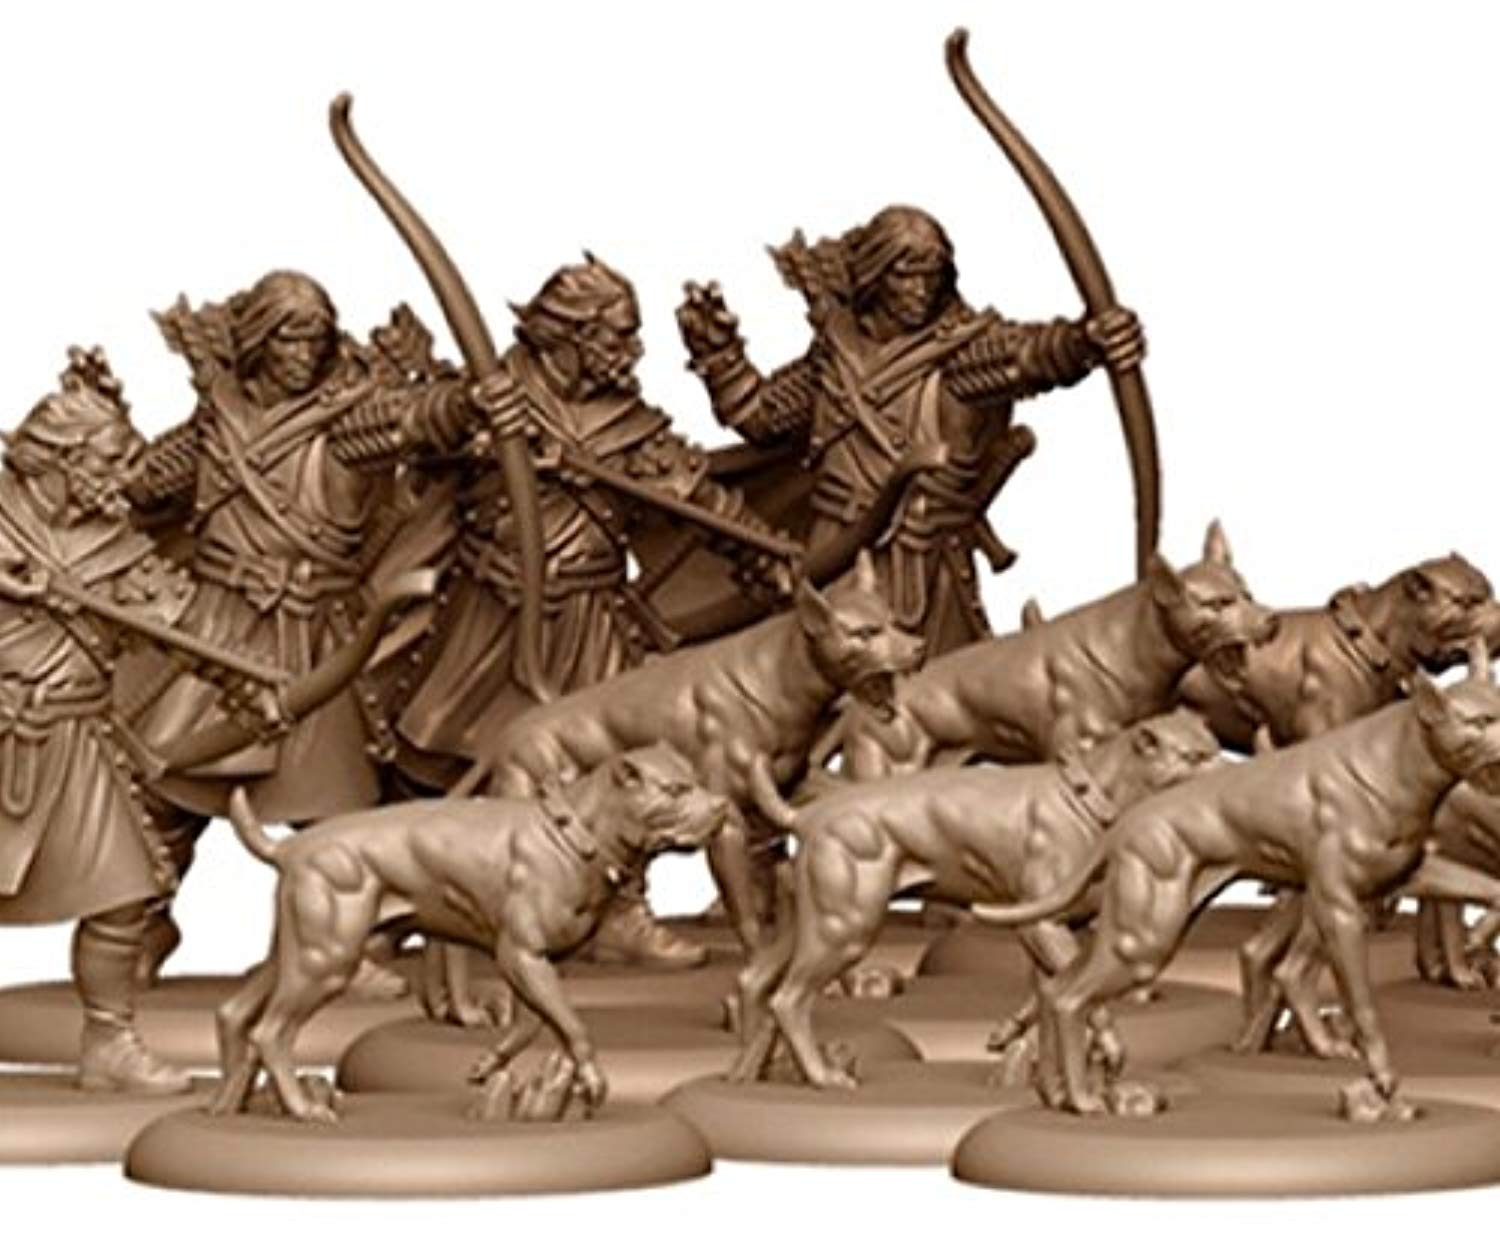 A Song of Ice and Fire: Tabletop Miniatures Game Bolton Bastard's Girls Unit Box, by CMON - image 3 of 9